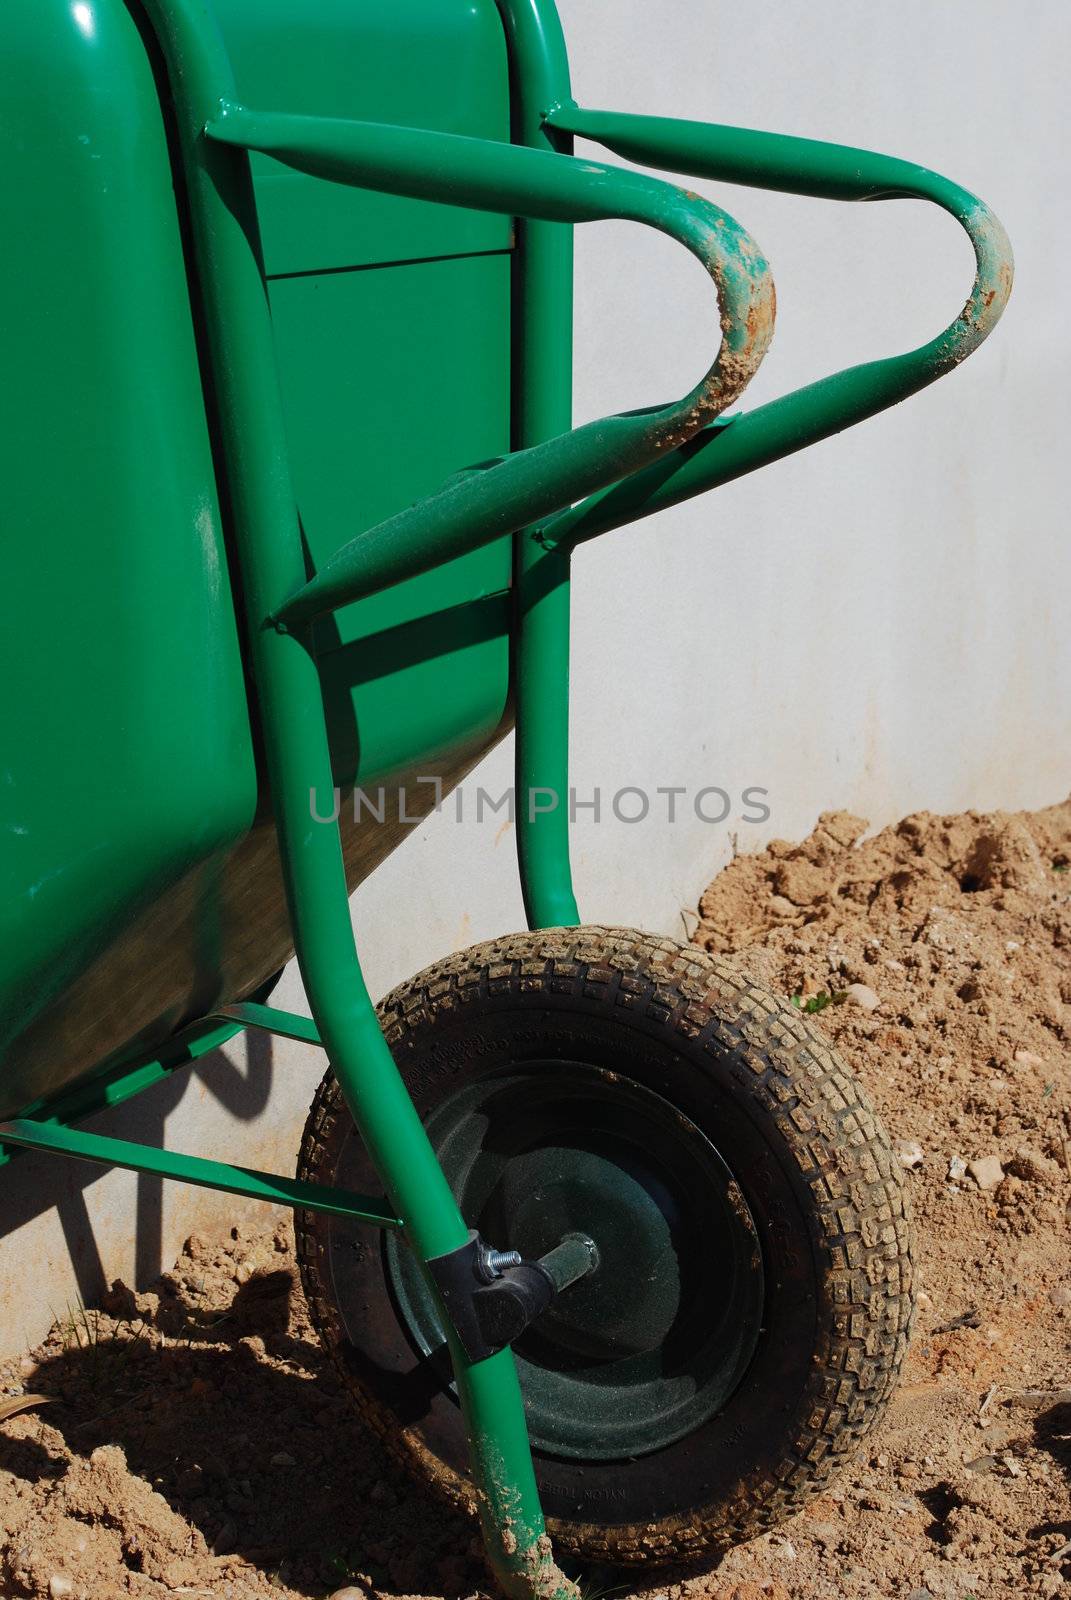 wheelbarrow used to carry tools for agriculture work